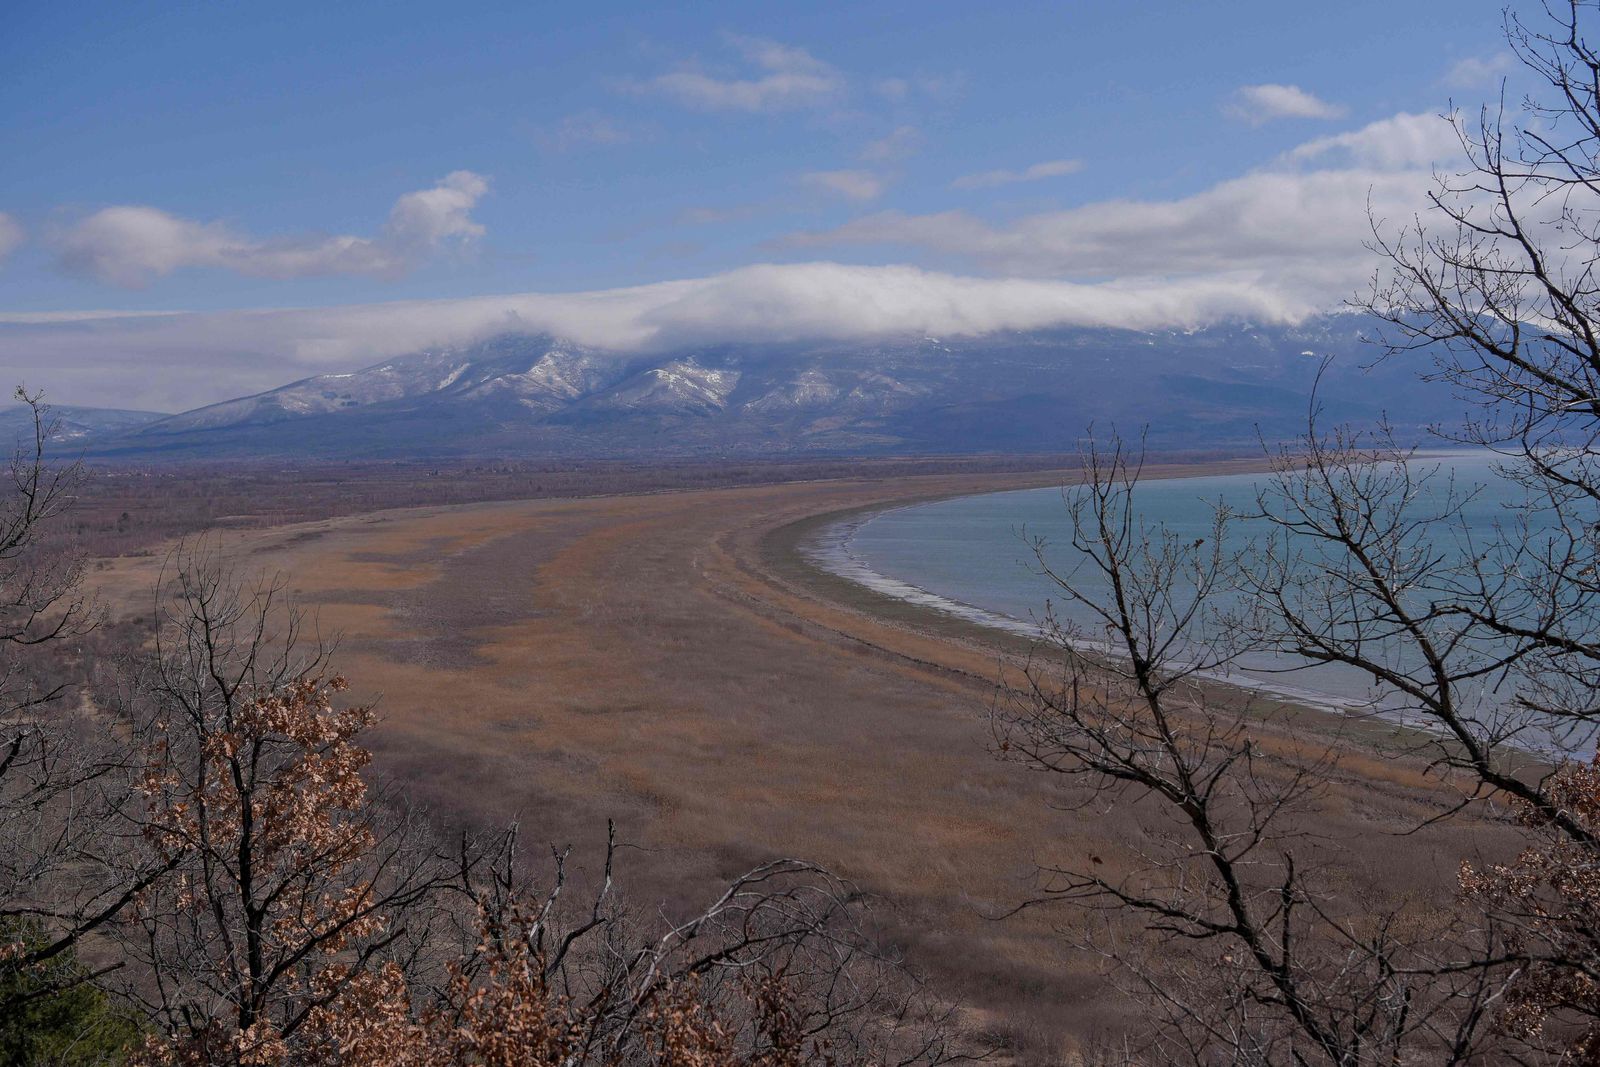 This photograph taken on March 17, 2023, shows a general view of the Prespa lake near Otesevo, in North Macedonia. - For millions of years Lake Prespa was pristine. But following decades of climate change, over consumption and pollution, the prehistoric body of water in southeast Europe is shrinking at an alarming rate. Straddling the borders of Albania, Greece and North Macedonia, Lake Prespa is believed to be home to thousands of species that rely on the water and its surrounding habitat.  But warming temperatures have wreaked havoc on the annual snowfall in the area, drying up vital streams that feed into Prespa, putting the species that depend on the lake and another nearby body of water at risk. (Photo by Armend NIMANI / AFP) - AFP